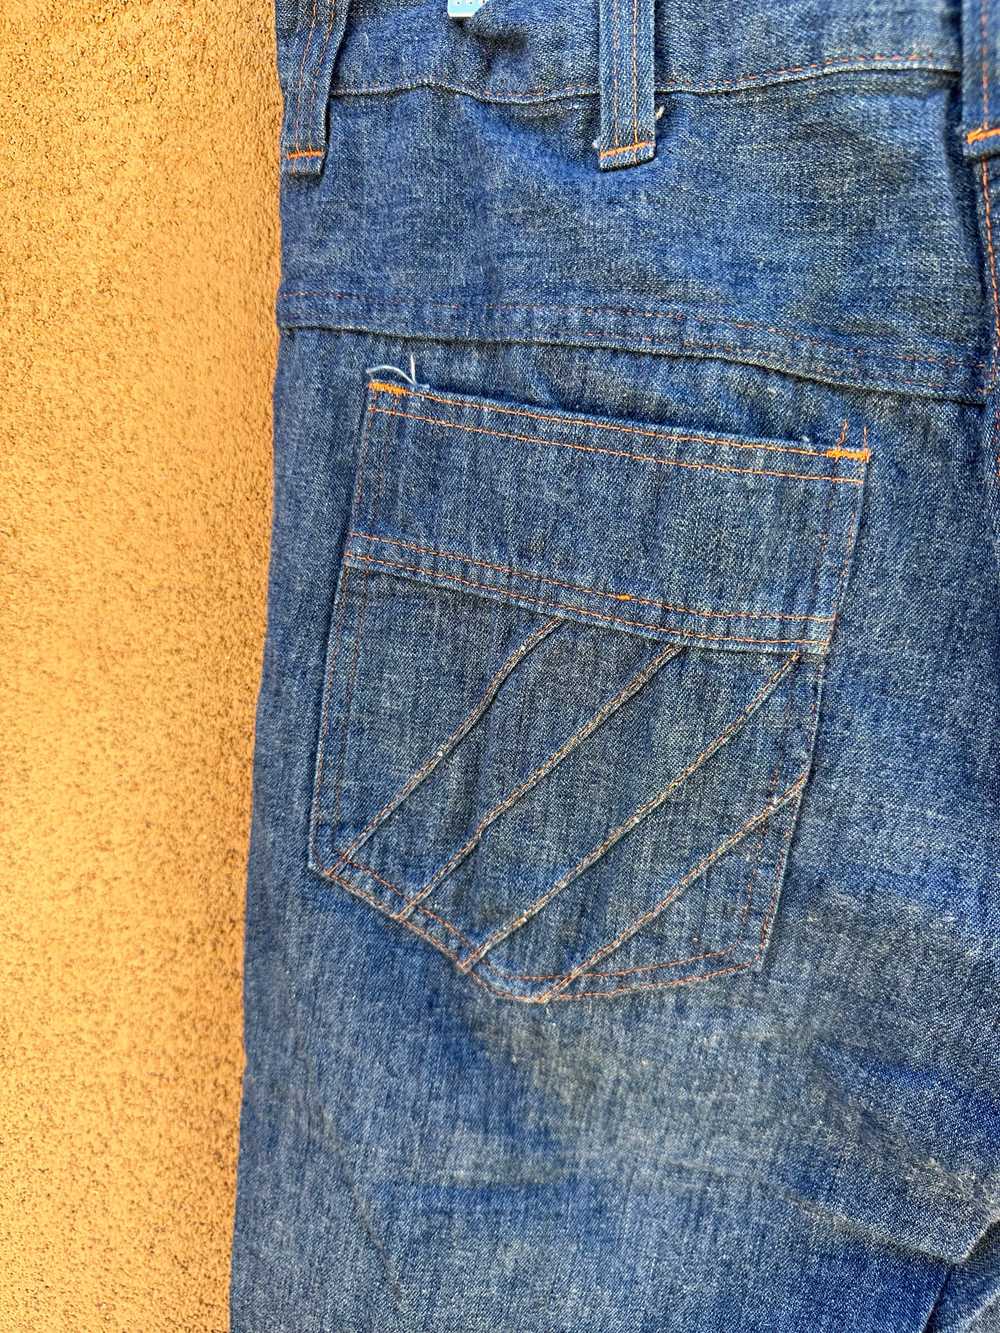 Jeans Joint 70's Bell Bottoms 34 x 29 - image 2